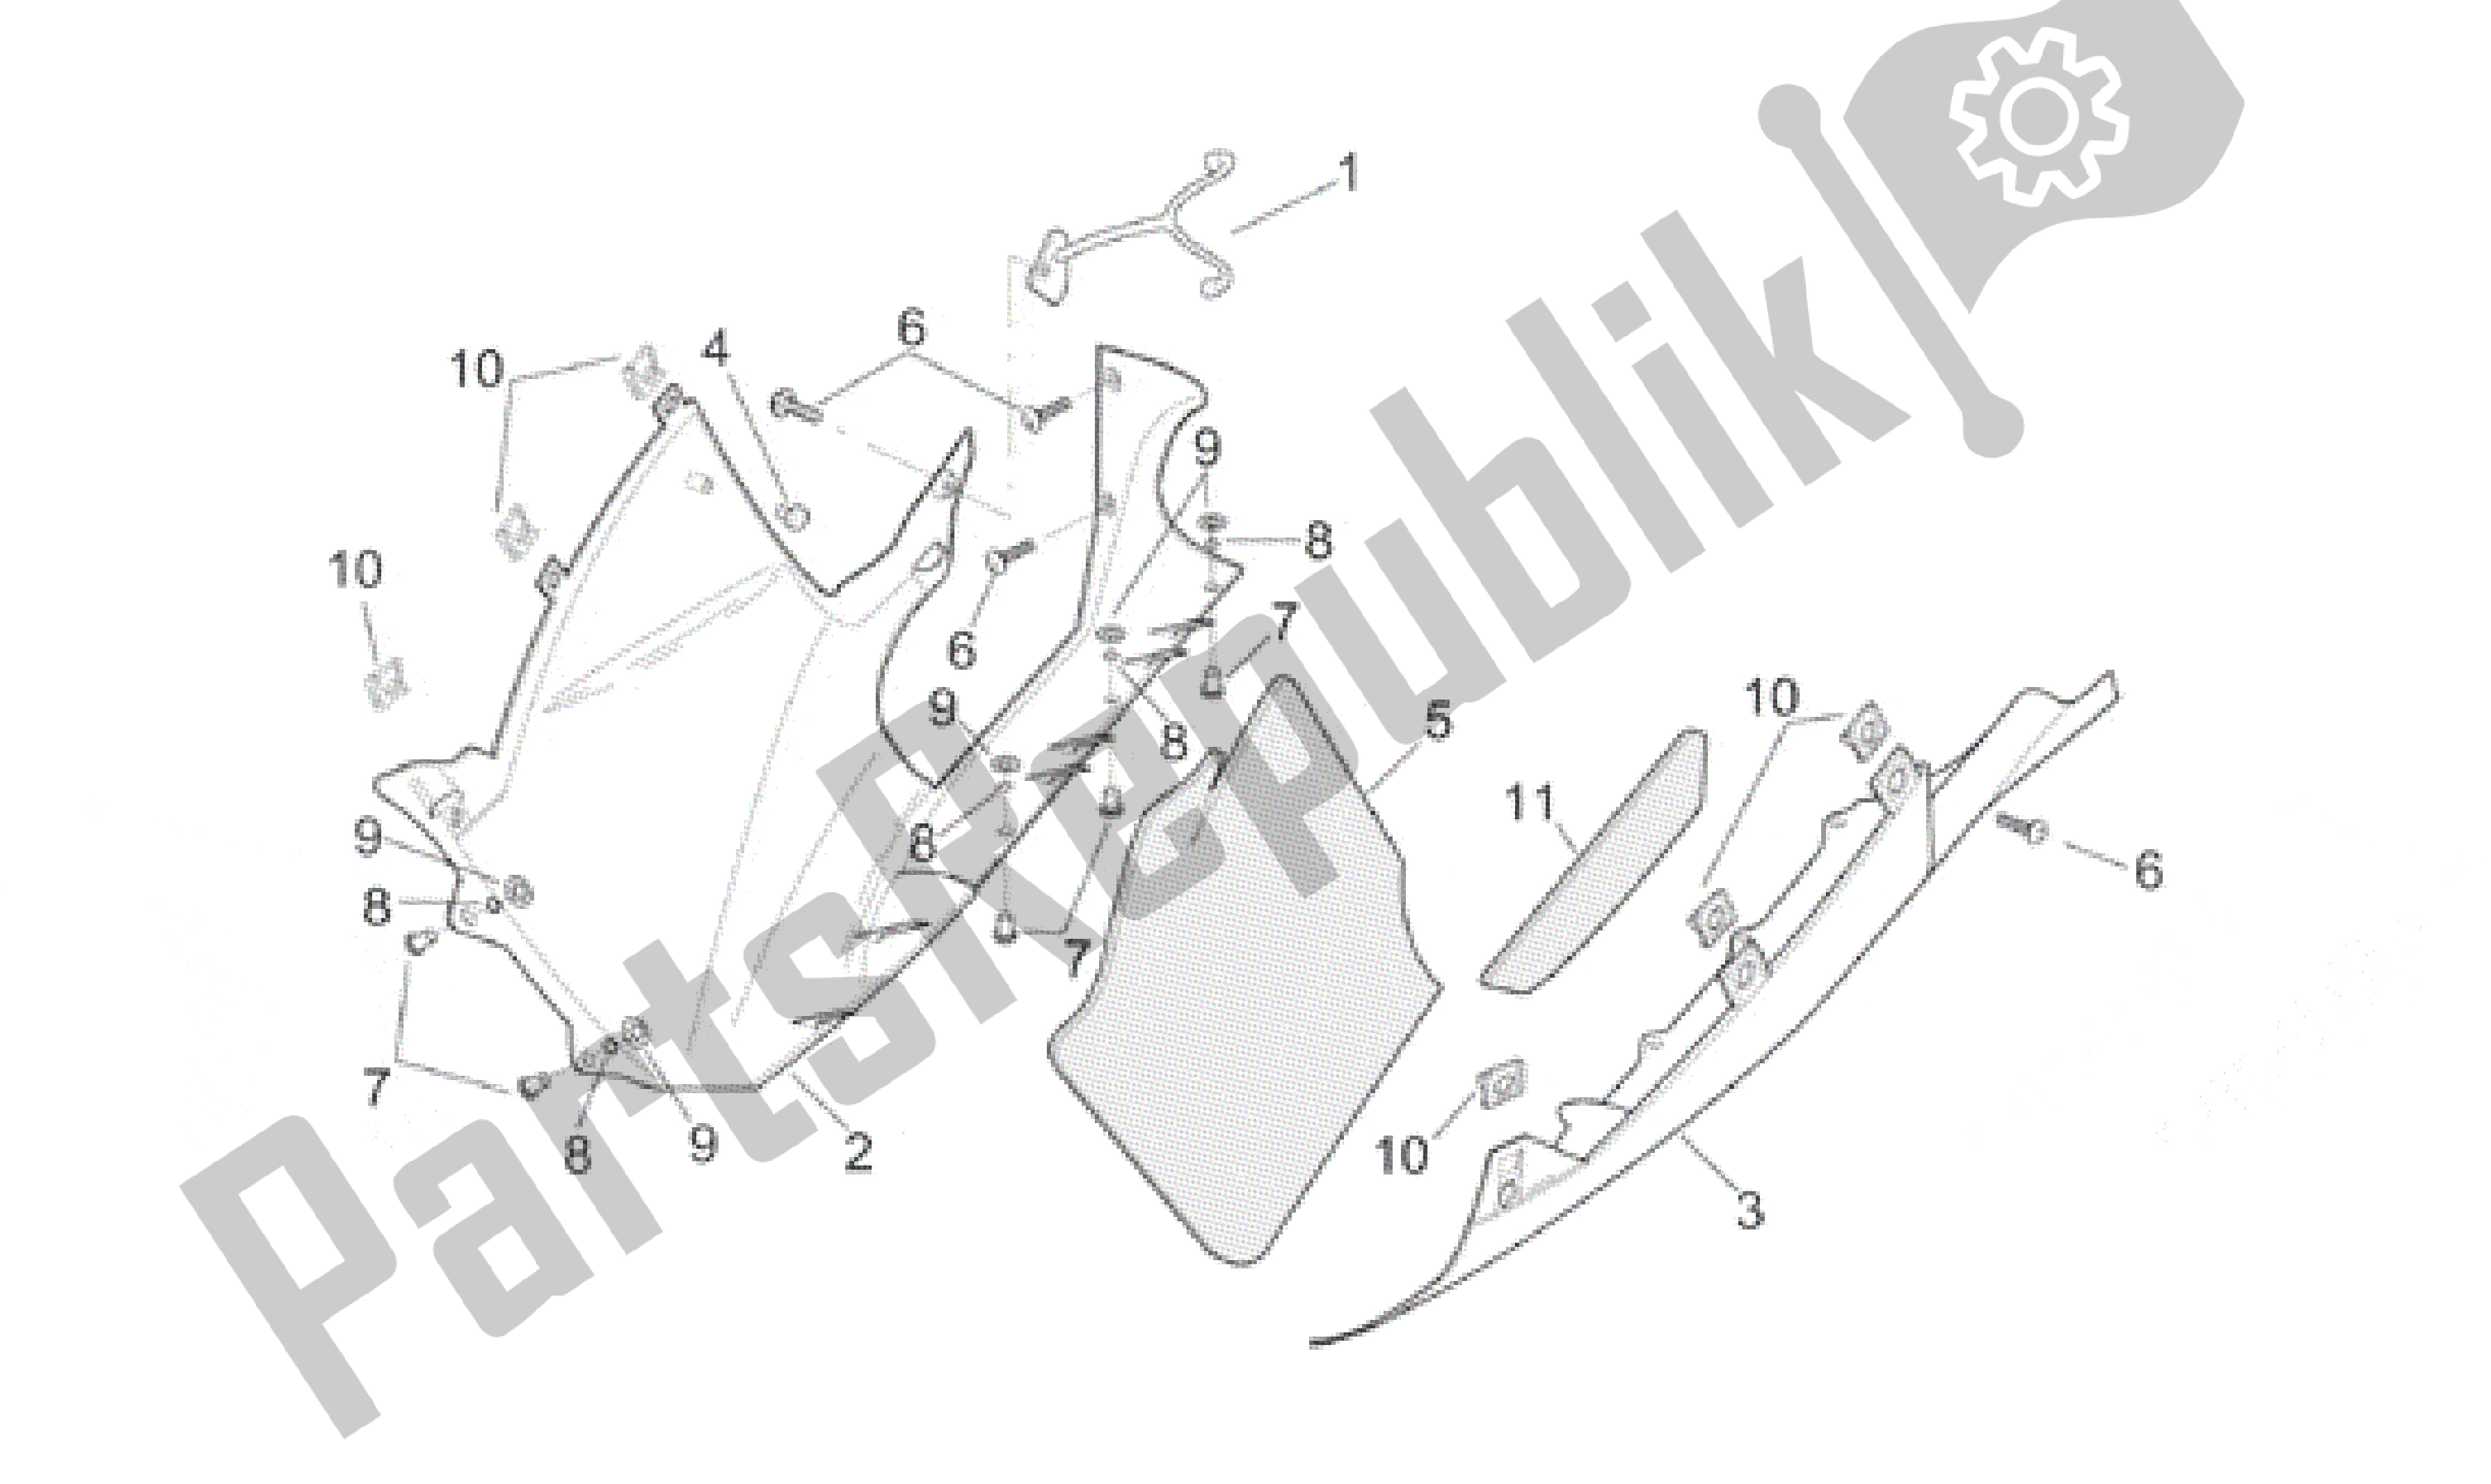 All parts for the Central Body - Lower Fairings of the Aprilia RSV Mille SP 391 X 1000 1999 - 2000